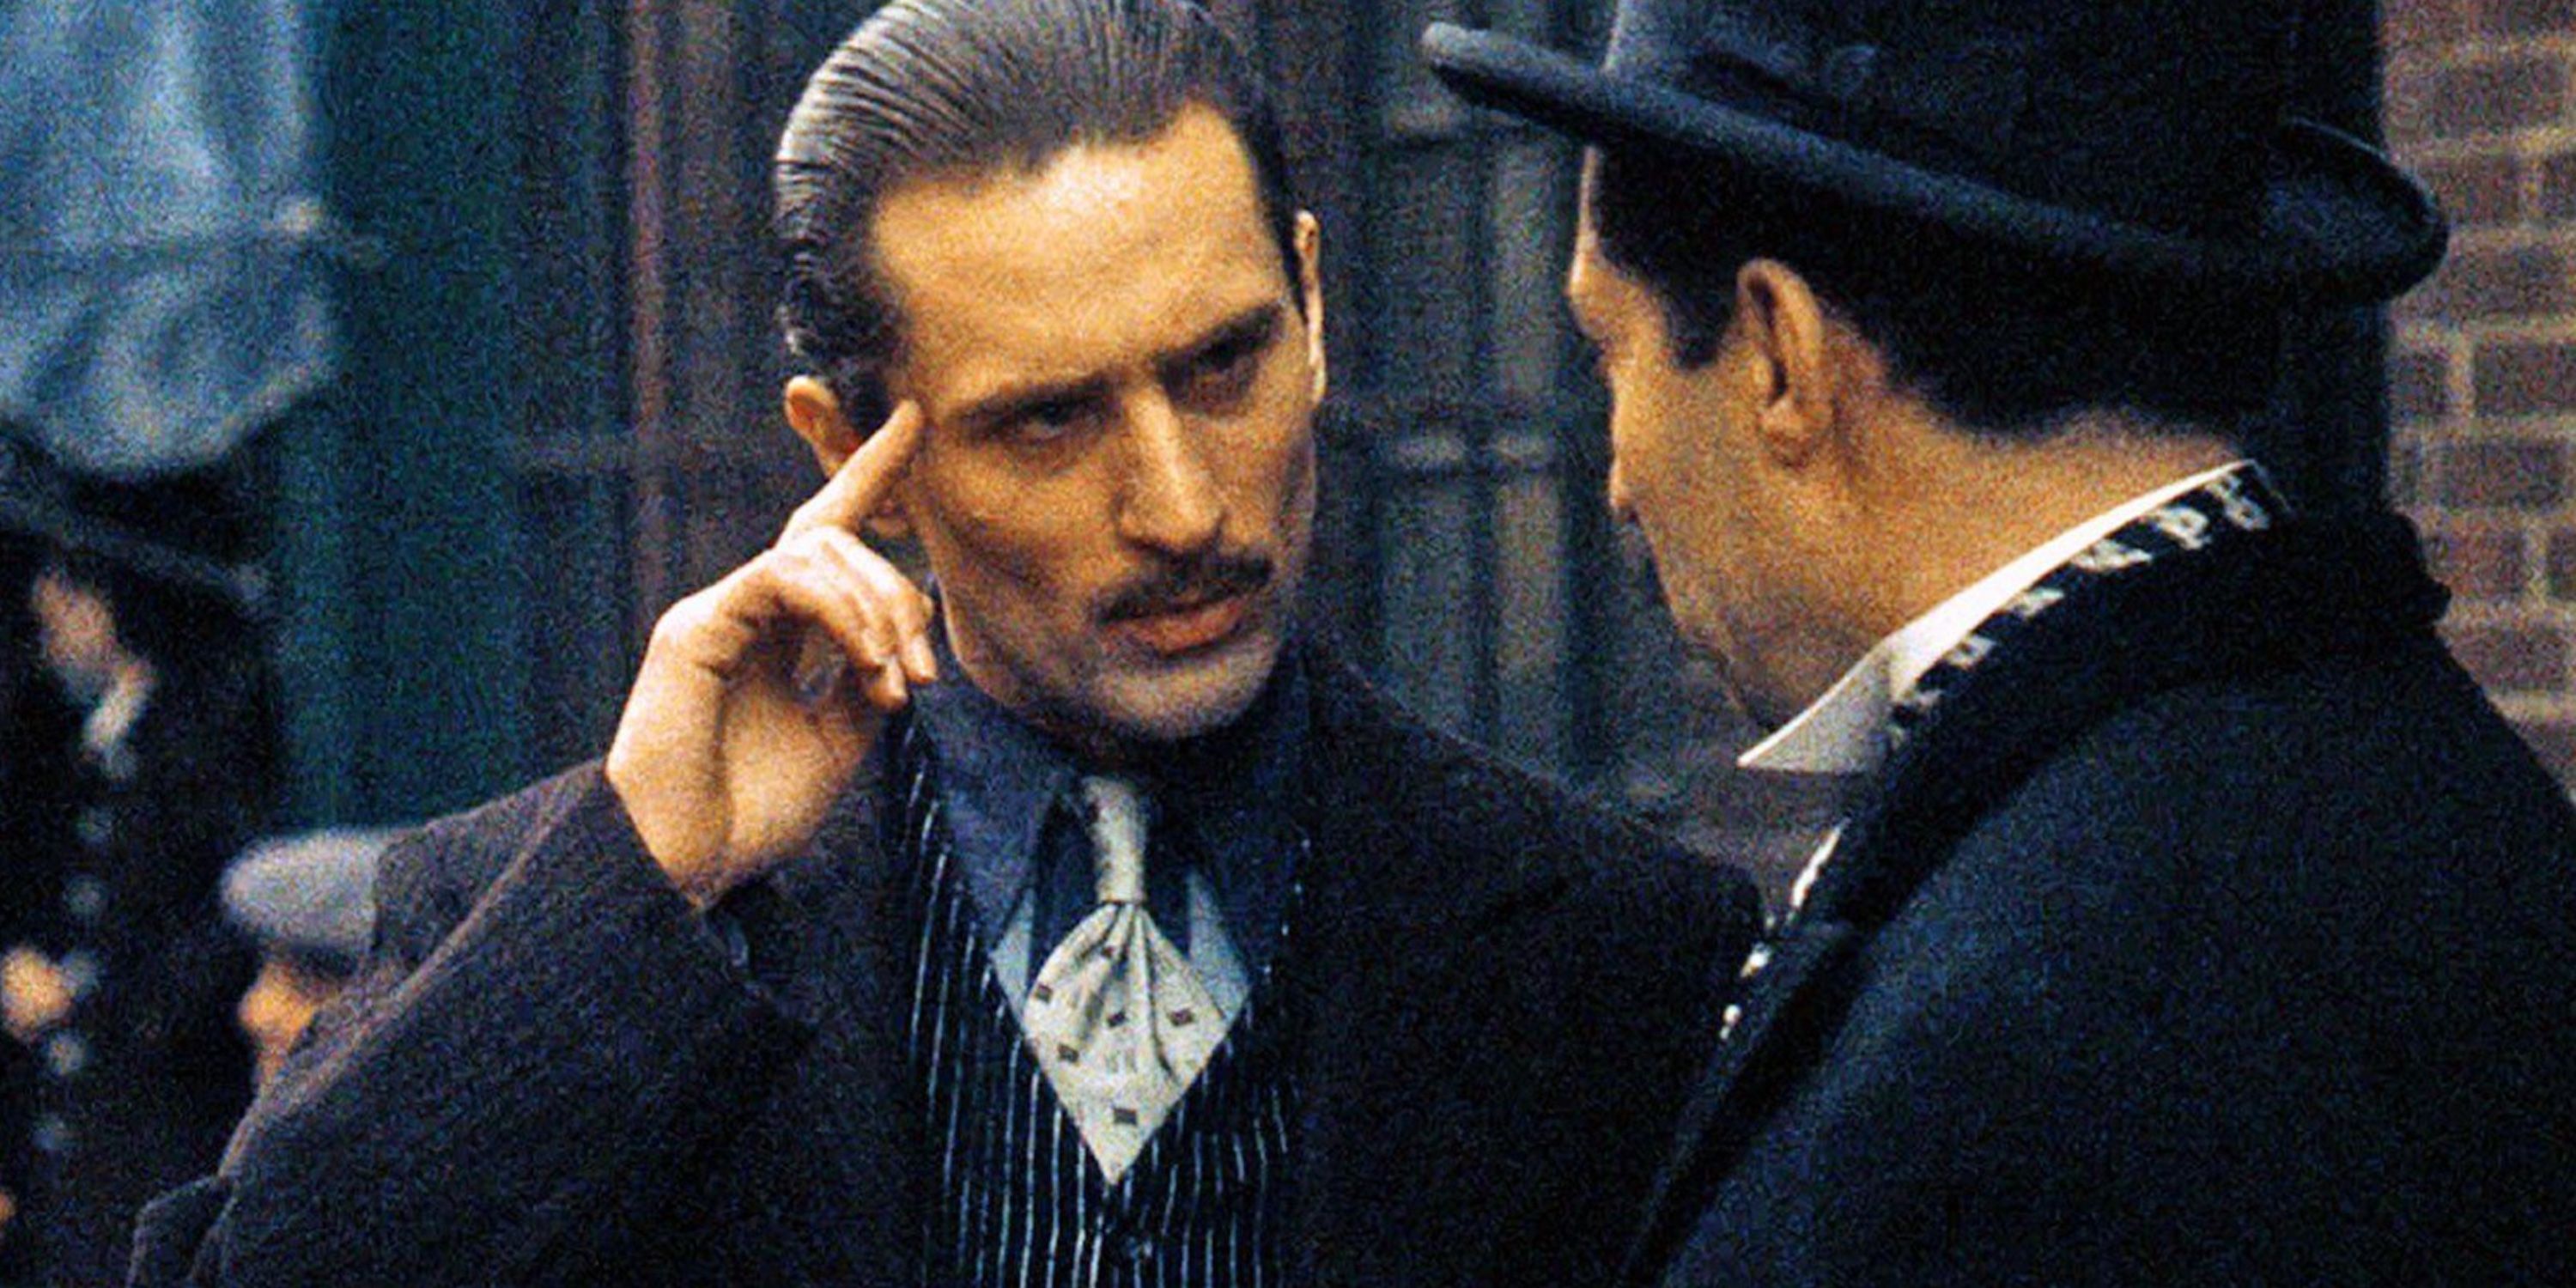 Robert De Niro as Vito Corleone in The Godfather Part talking to a friend on the street